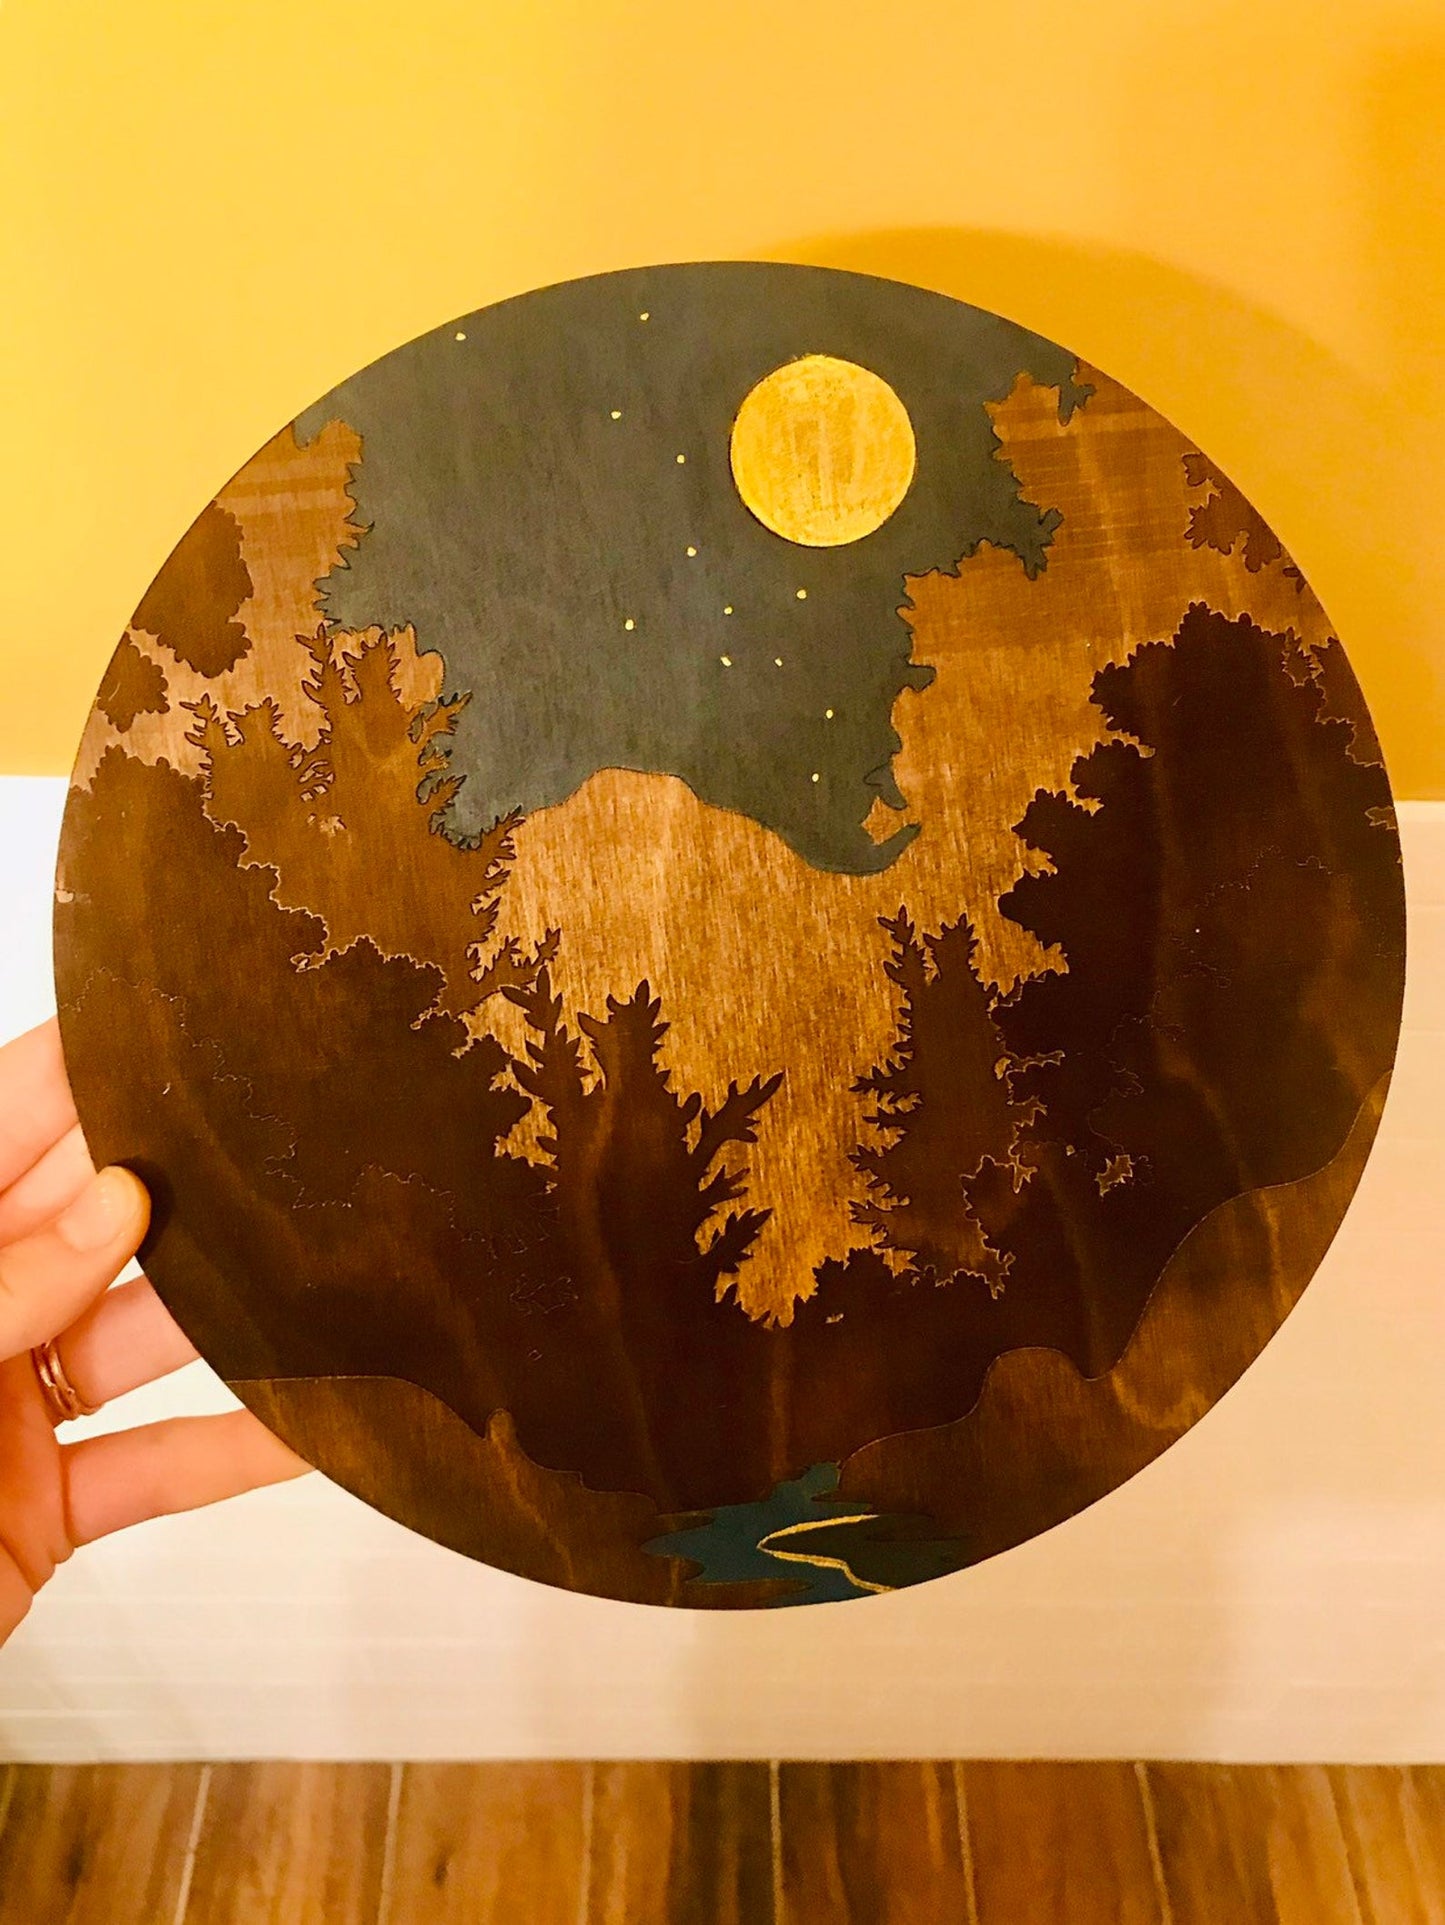 Night Sky with Golden Moon Over Forest Wall Art